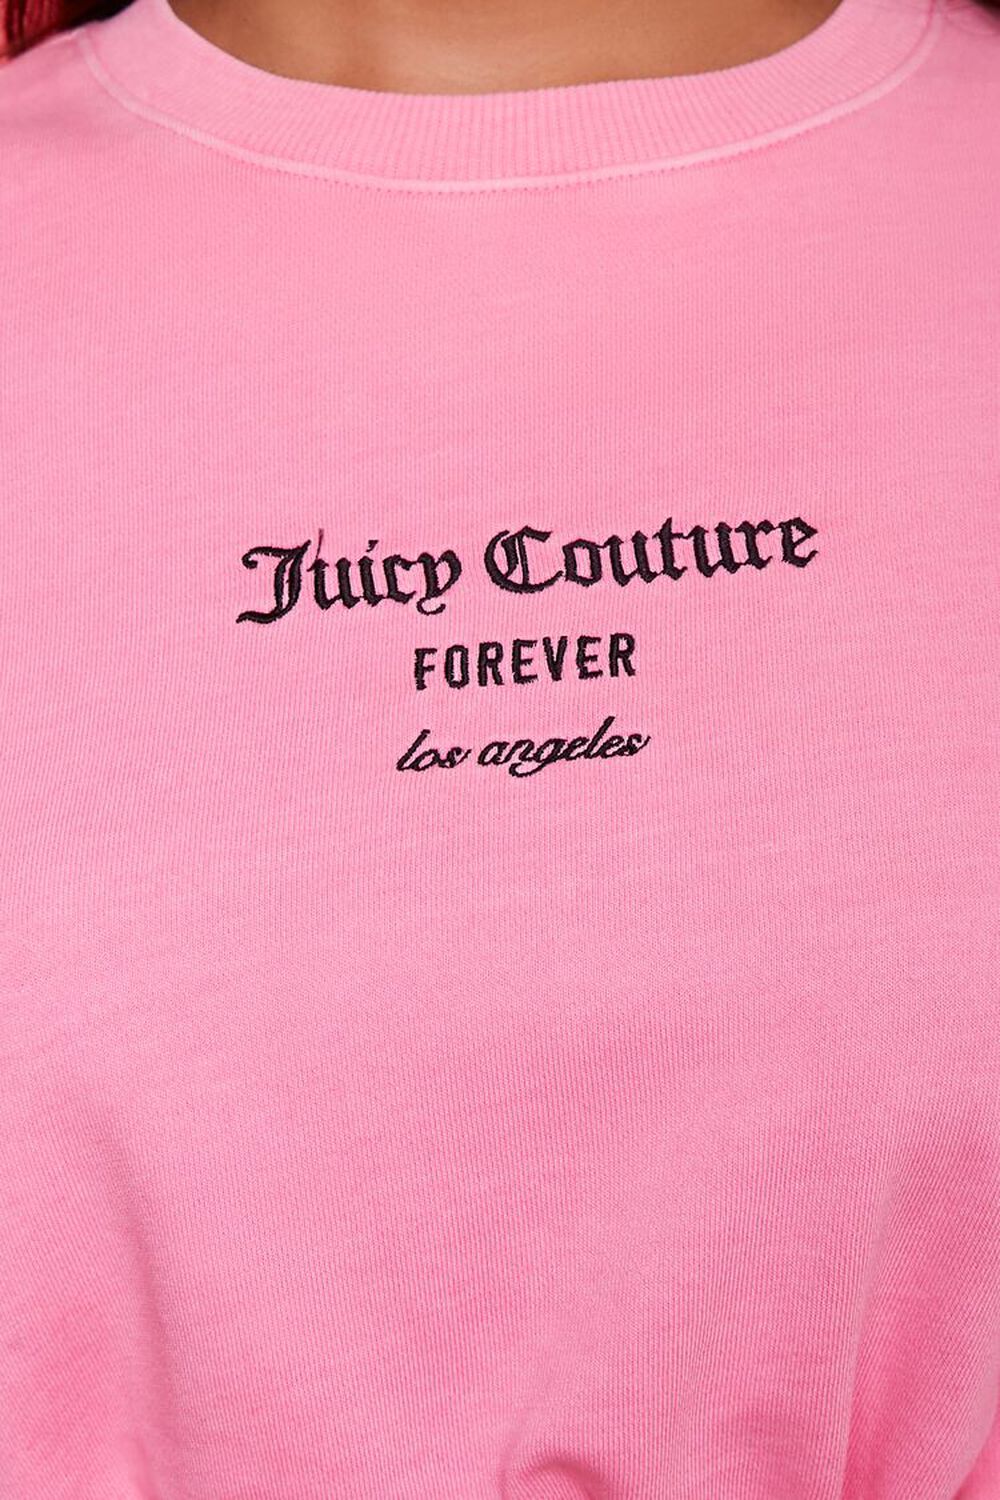 Fleece Juicy Couture Cropped Pullover